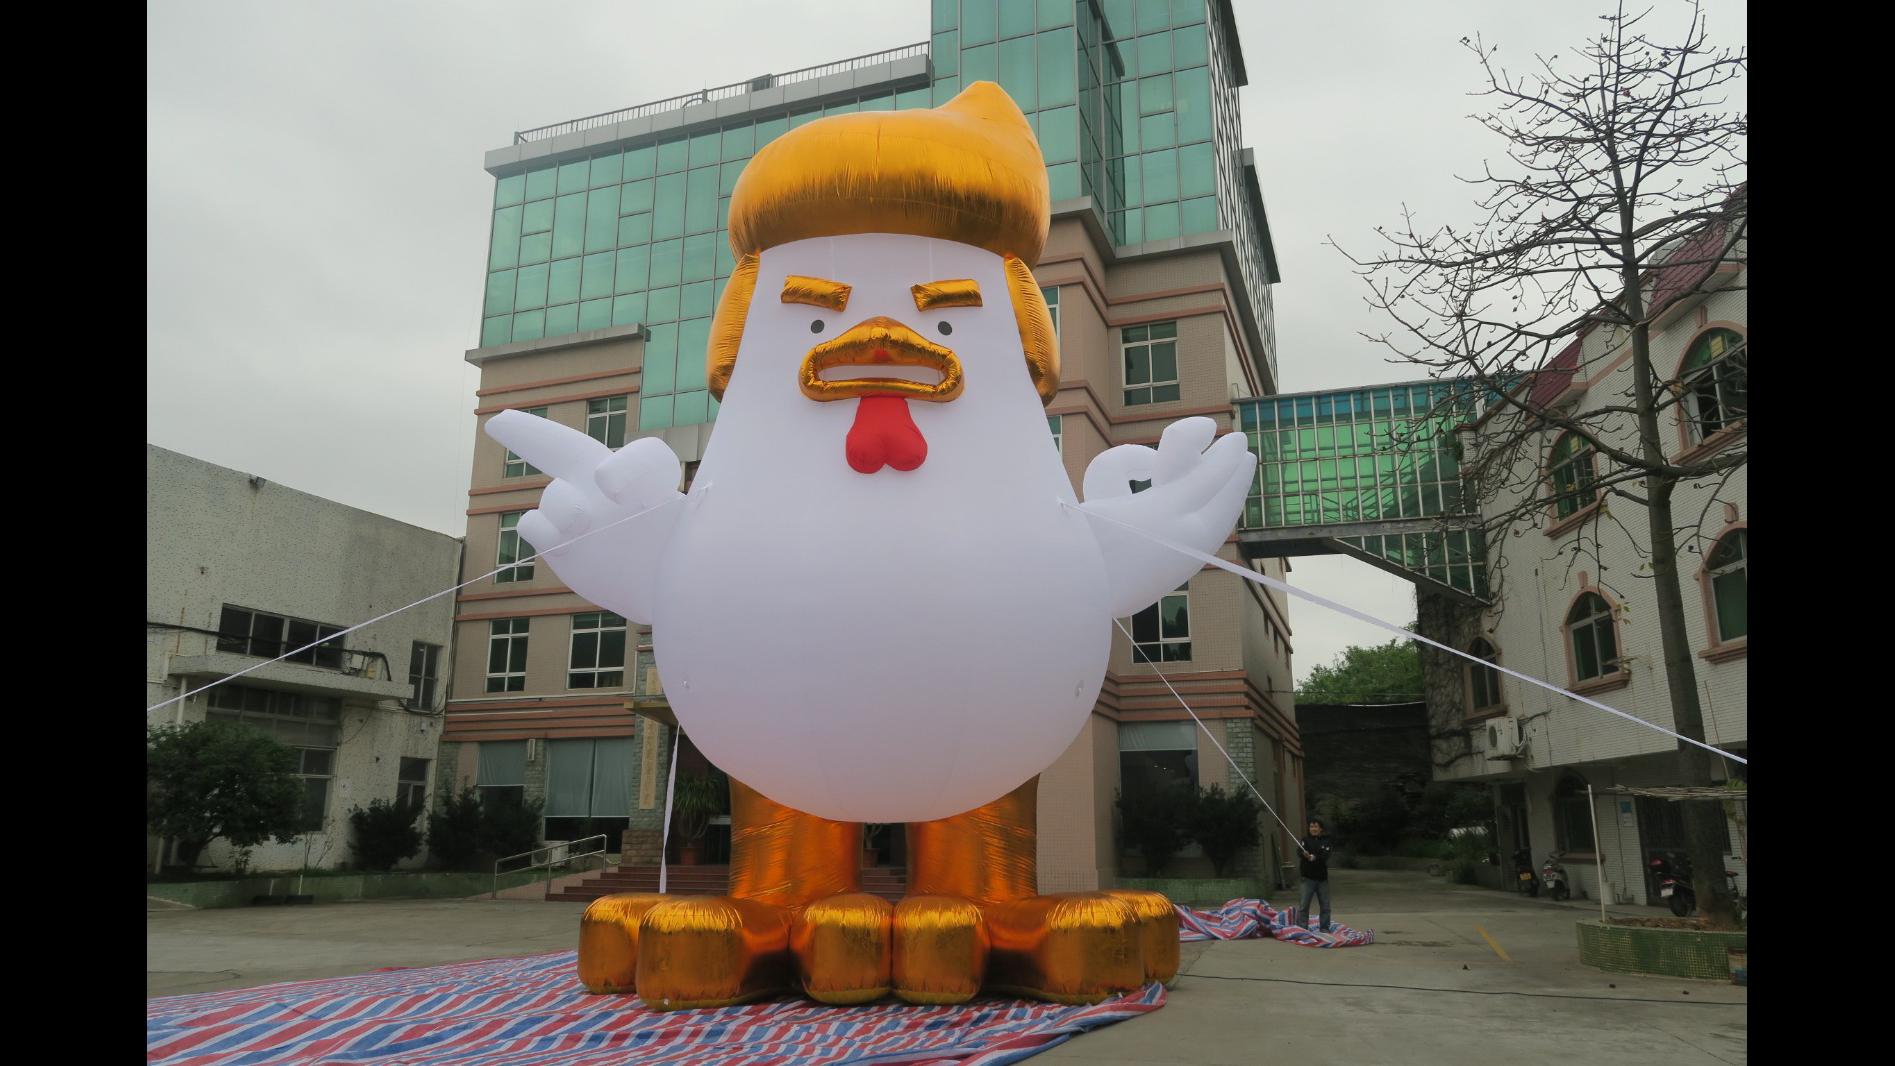 Protesters plan on bringing three inflatable chickens to Saturday’s march. The balloons are meant to resemble President Trump. (Courtesy of Taran Brar)